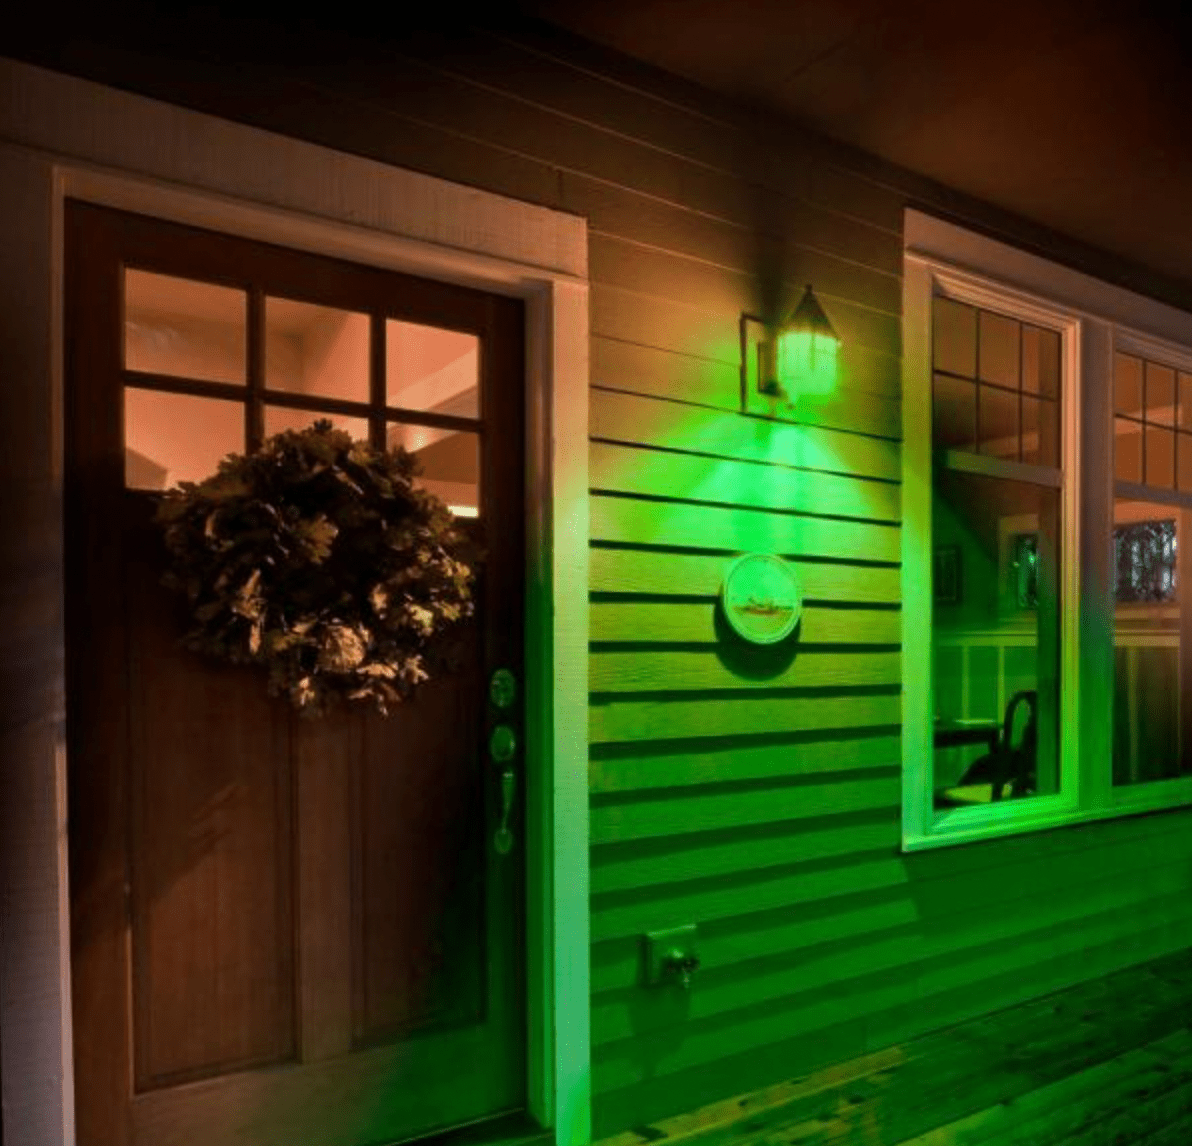 What does a green porch light mean?